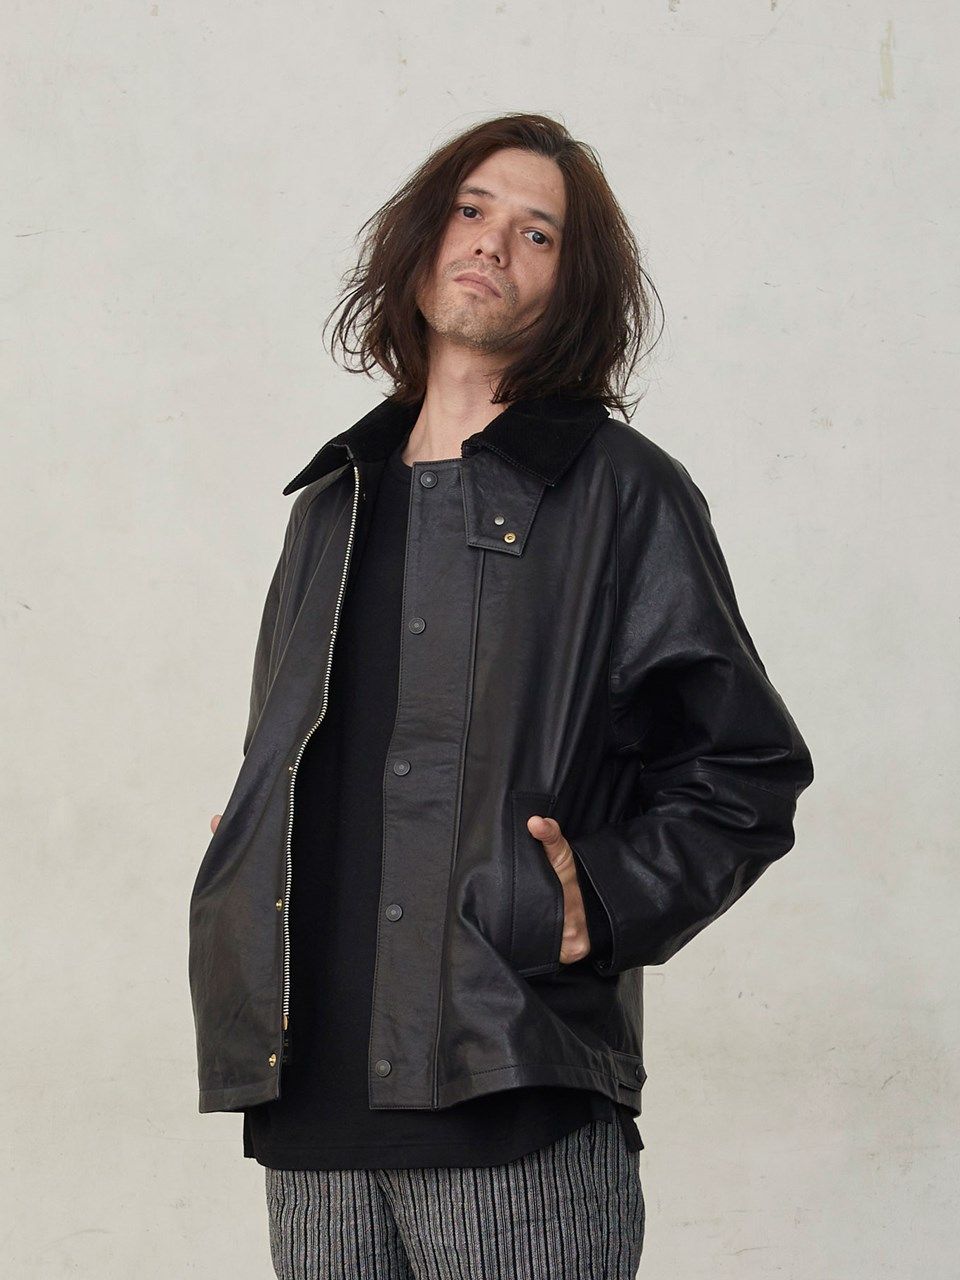 EGO TRIPPING - 《予約品》 CARRIER LEATHERJACKET / レザージャケット